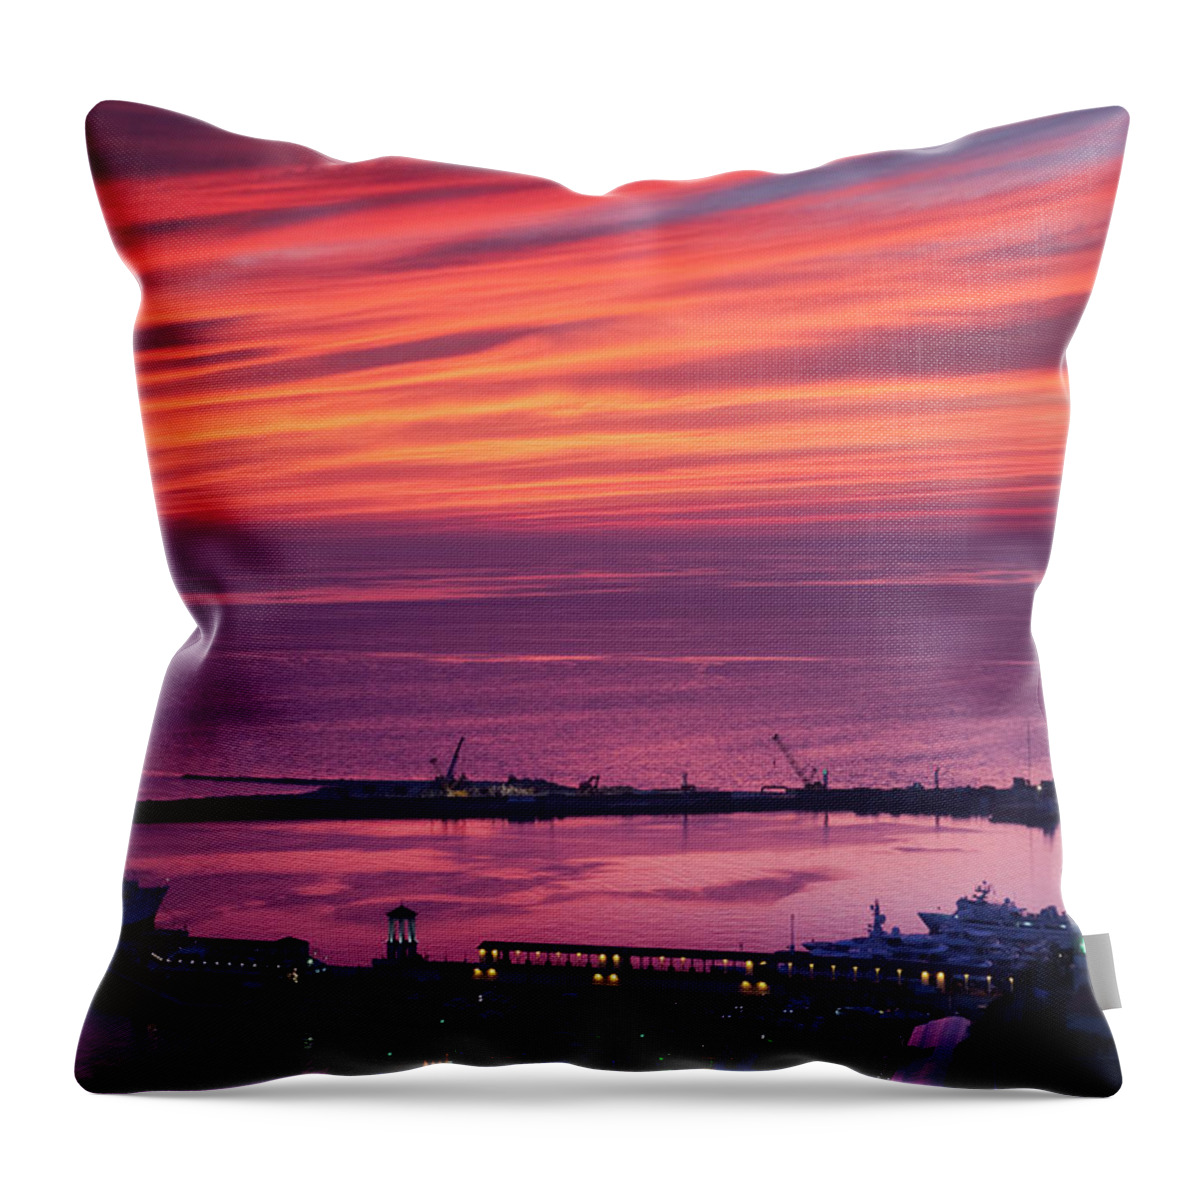 Tranquility Throw Pillow featuring the photograph Elevated View Of Lighthouse Beach And by Walter Bibikow